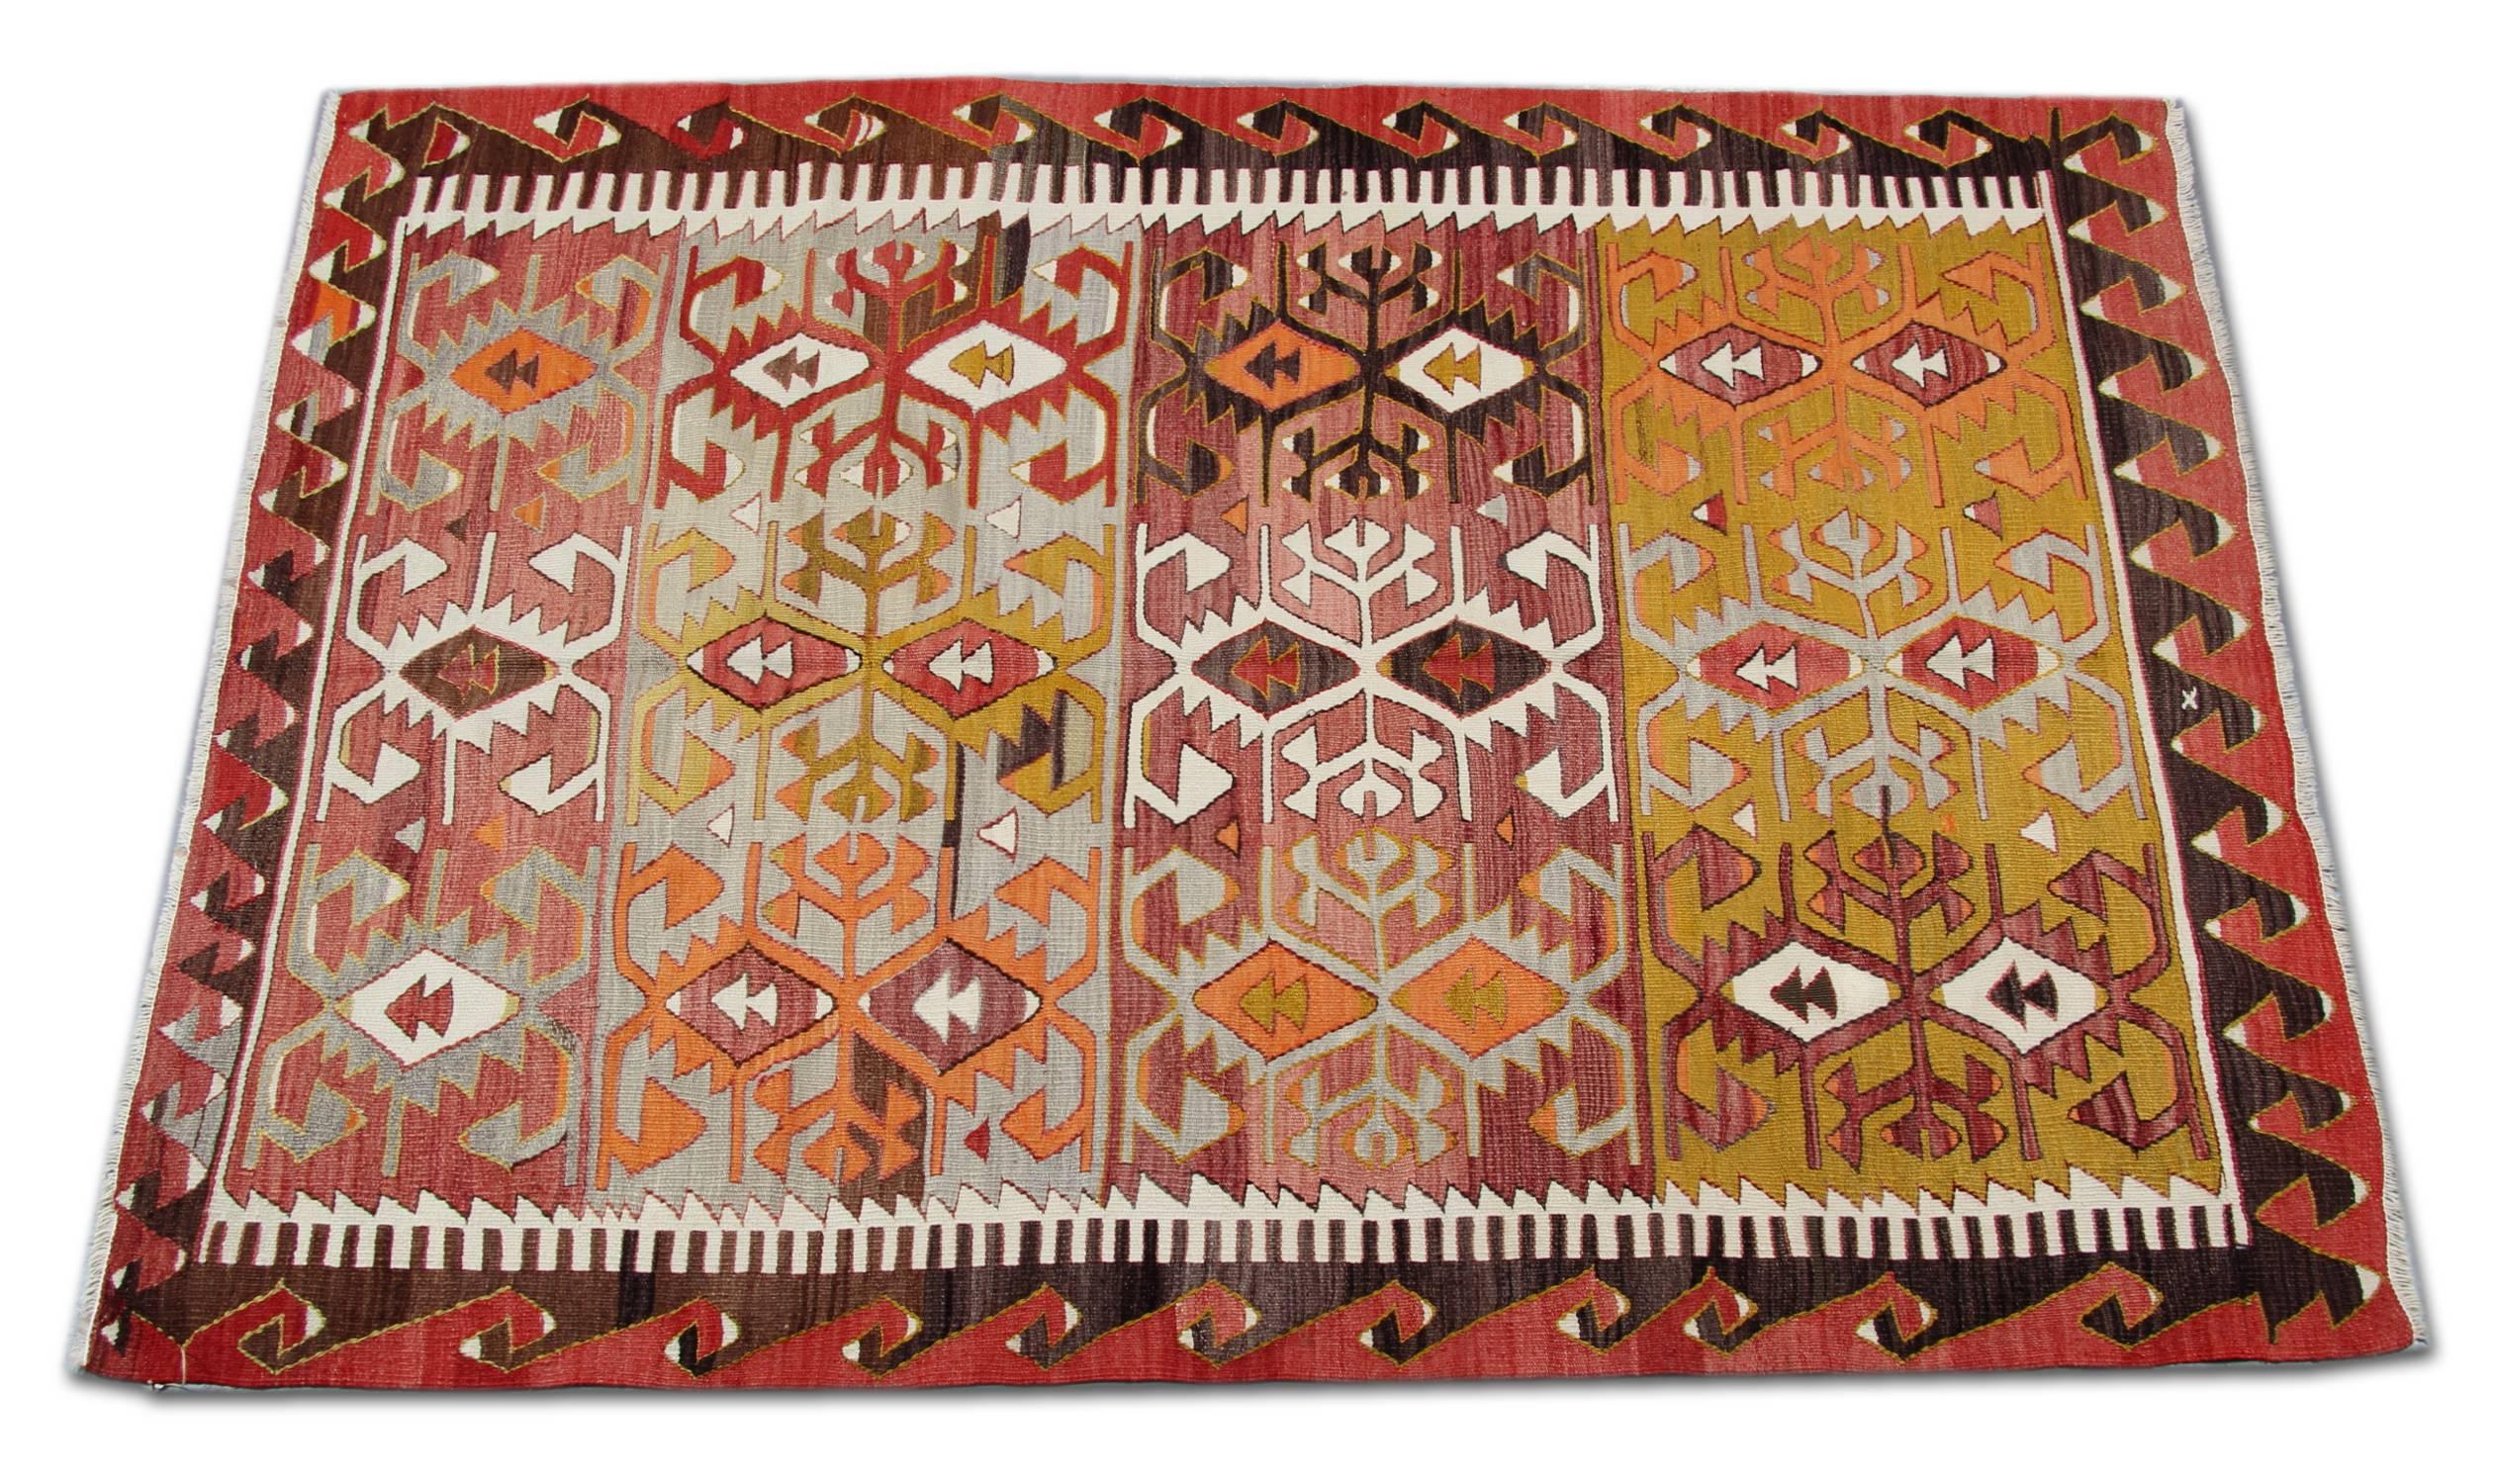 This Antique Rug is Turkish handmade carpet Oriental rug has woven by very skilled weavers in Turkey, who used the highest quality wool and cotton. The flat-weave rug has light red, orange, grey-green, white, gold, yellow and dark brown colors. The